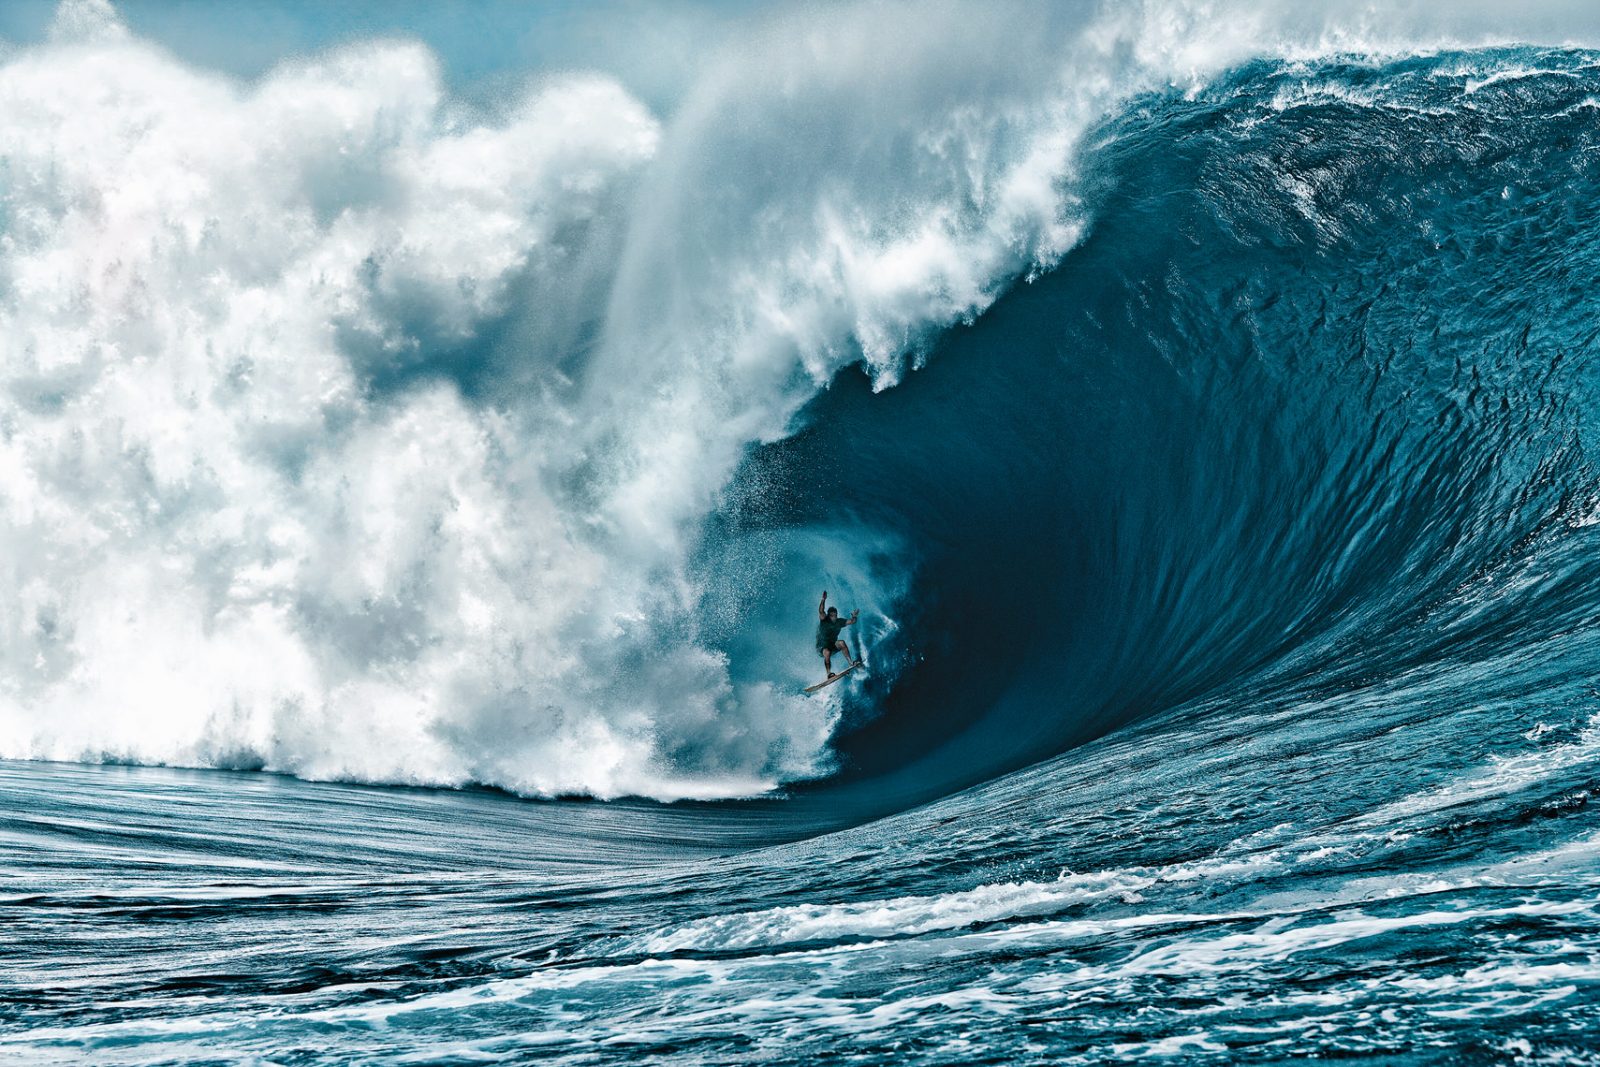 Teahupo’o. The World’s Scariest, Biggest Waves And Surf Spots